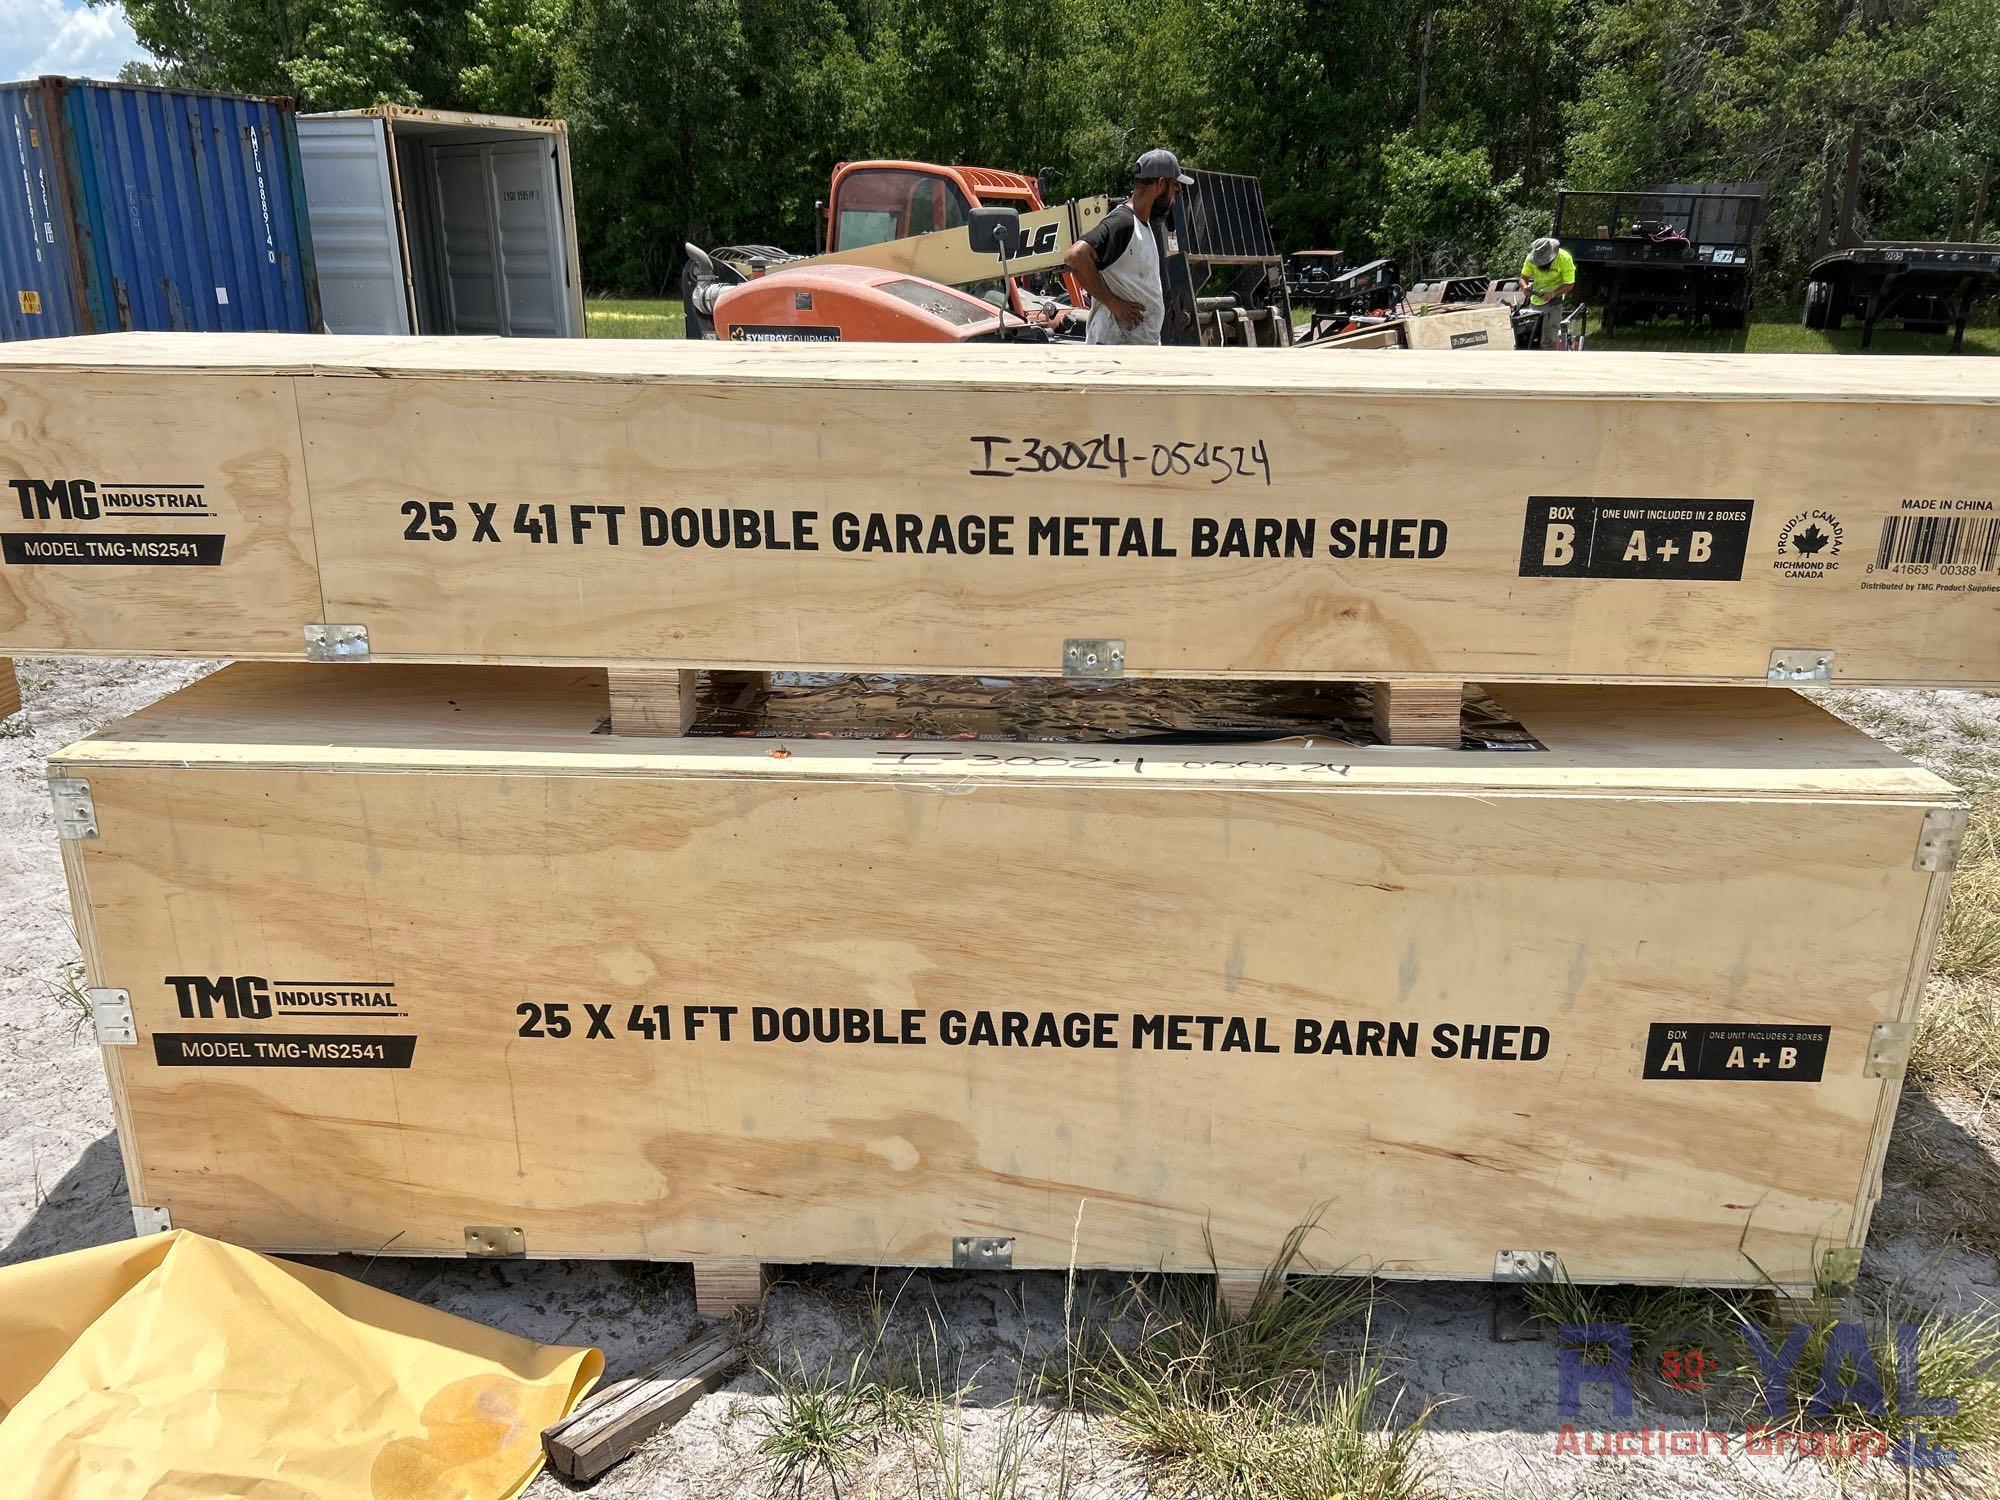 25 X 41 Ft Double Garage Barn Shed